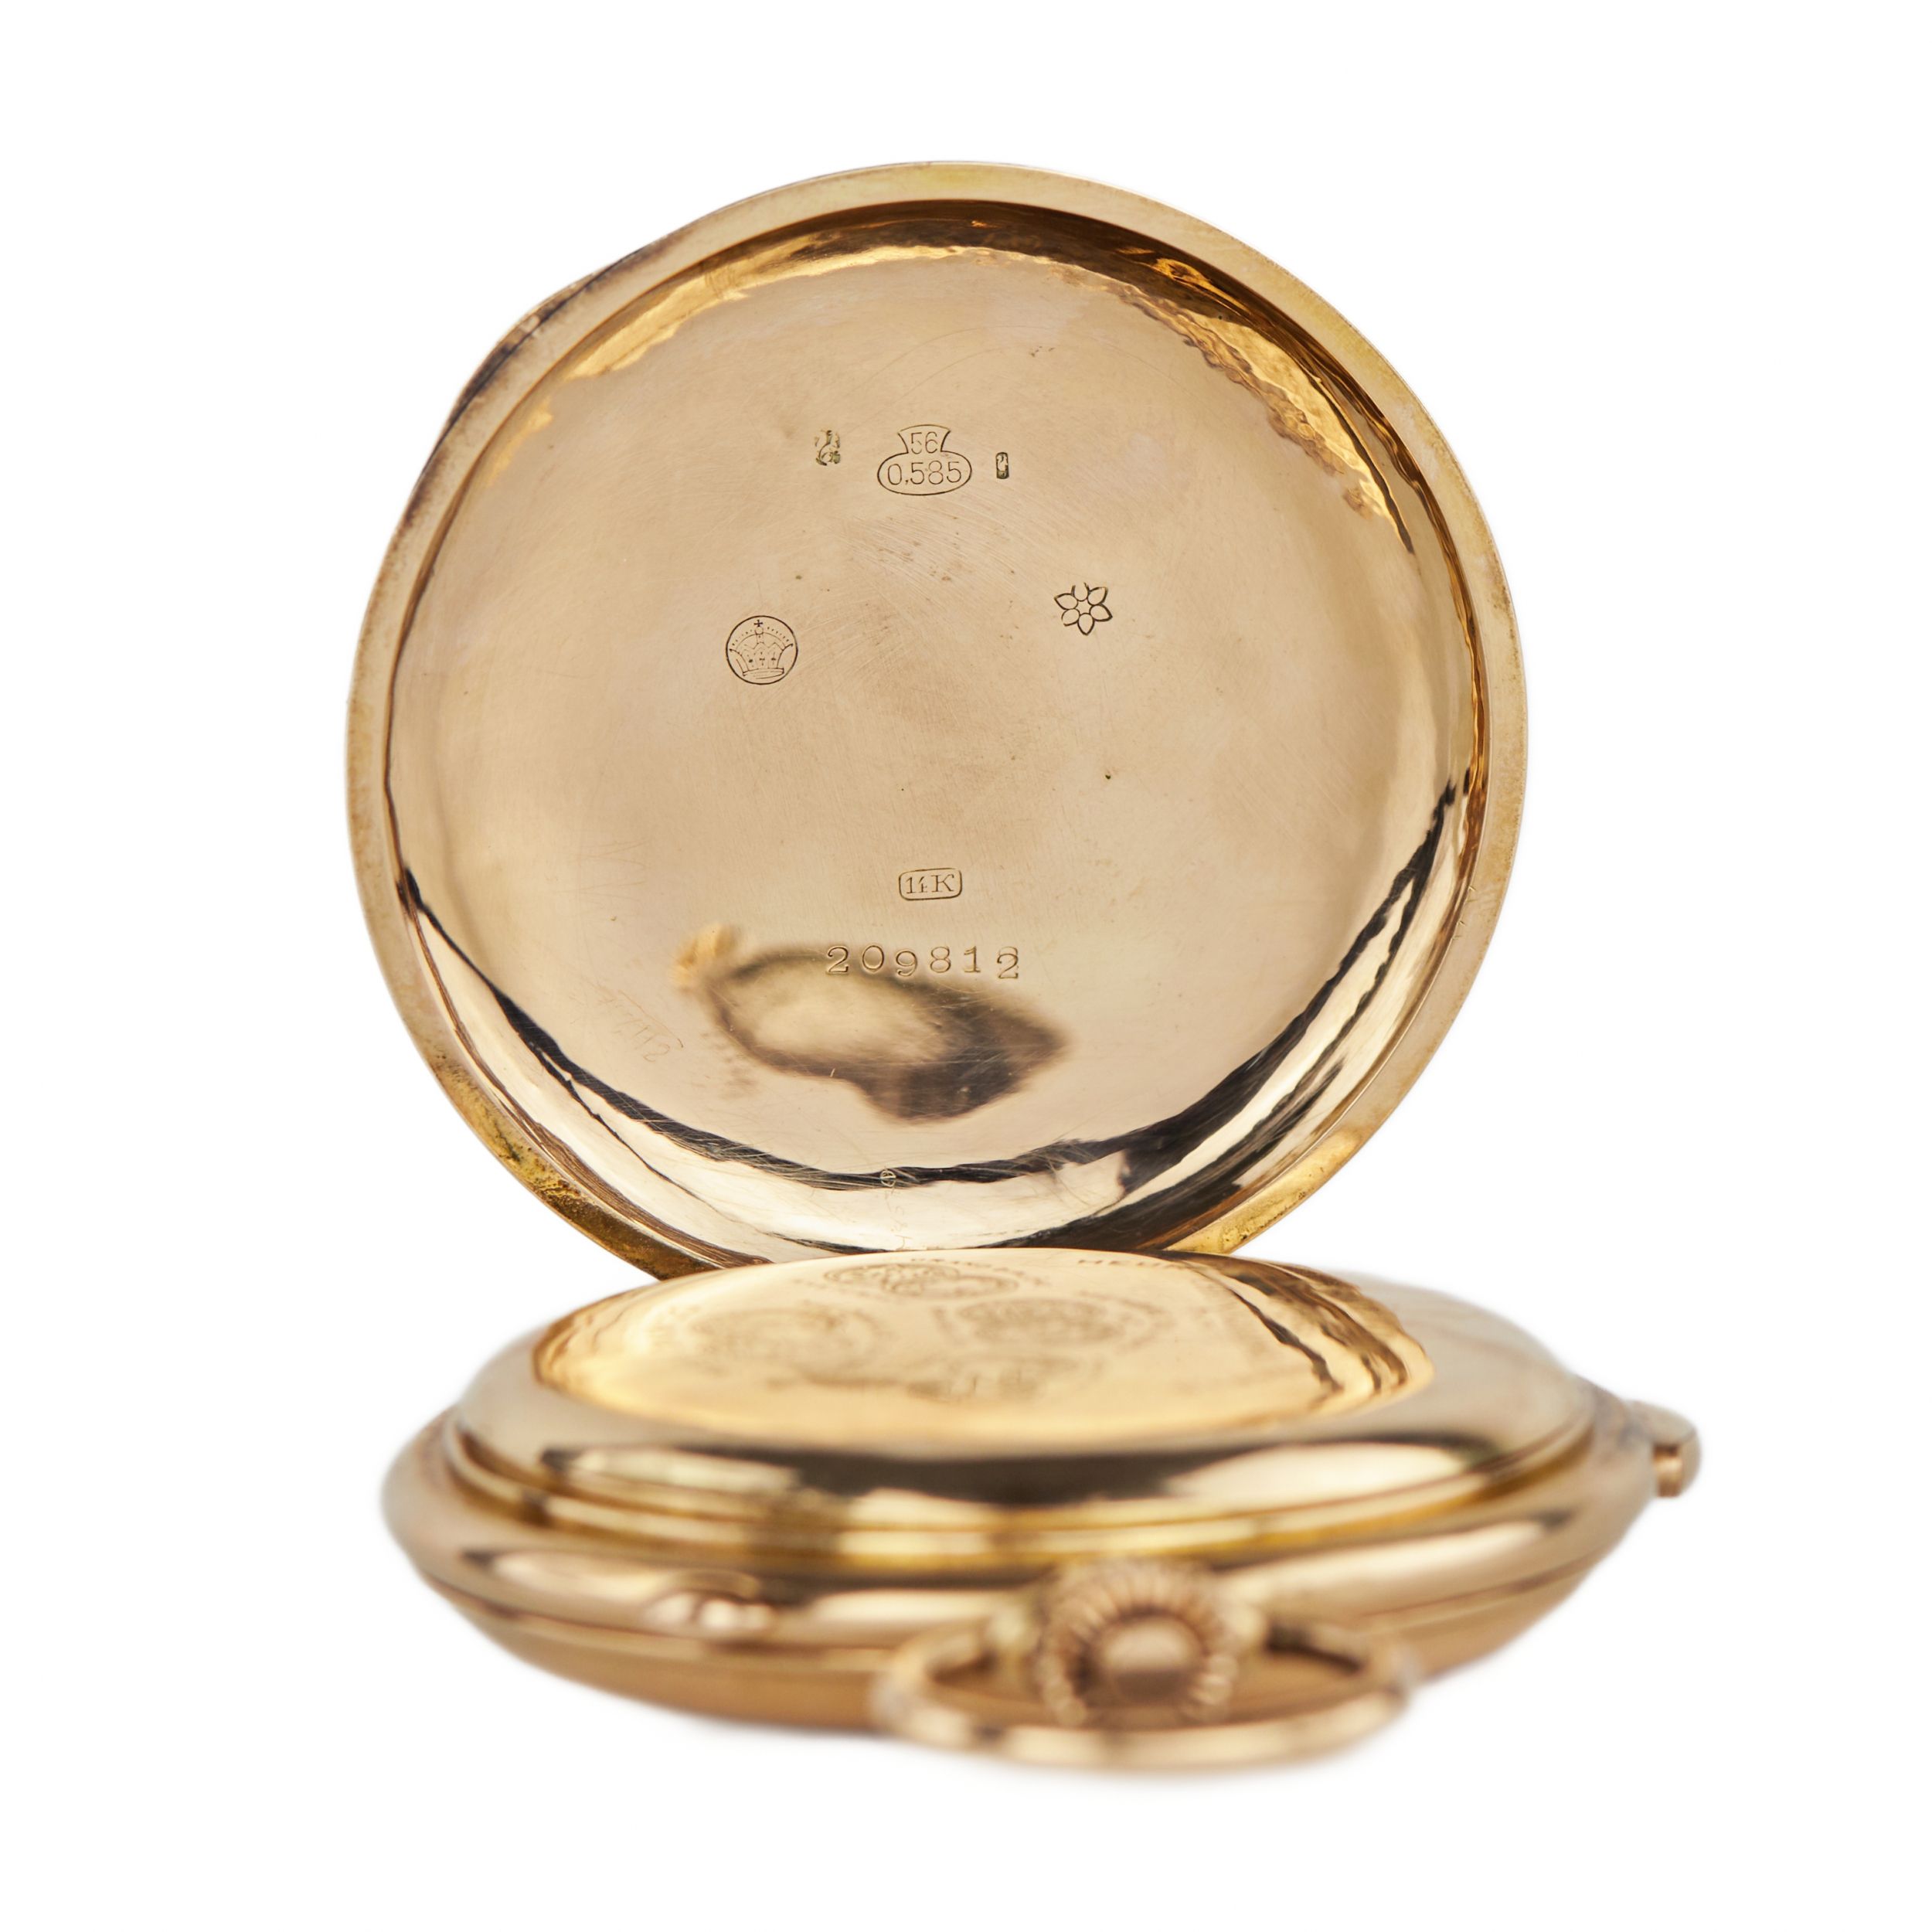 Heures Repetition Quarts Taschenuhr Chronographe 14k Gold Pocket Watch - Image 9 of 11